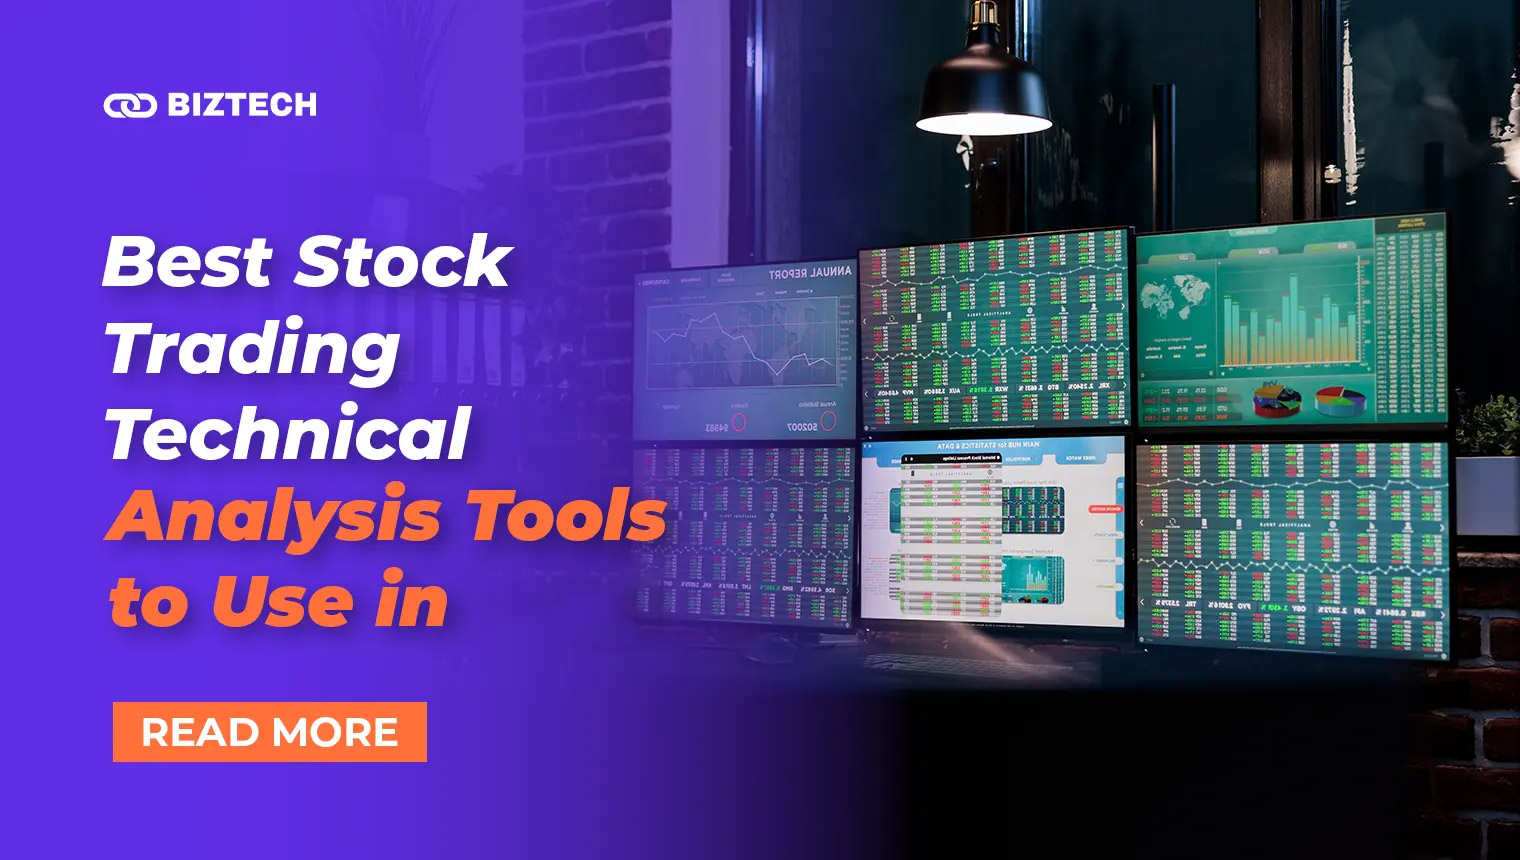 Best Stock Trading Technical Analysis Tools to Use